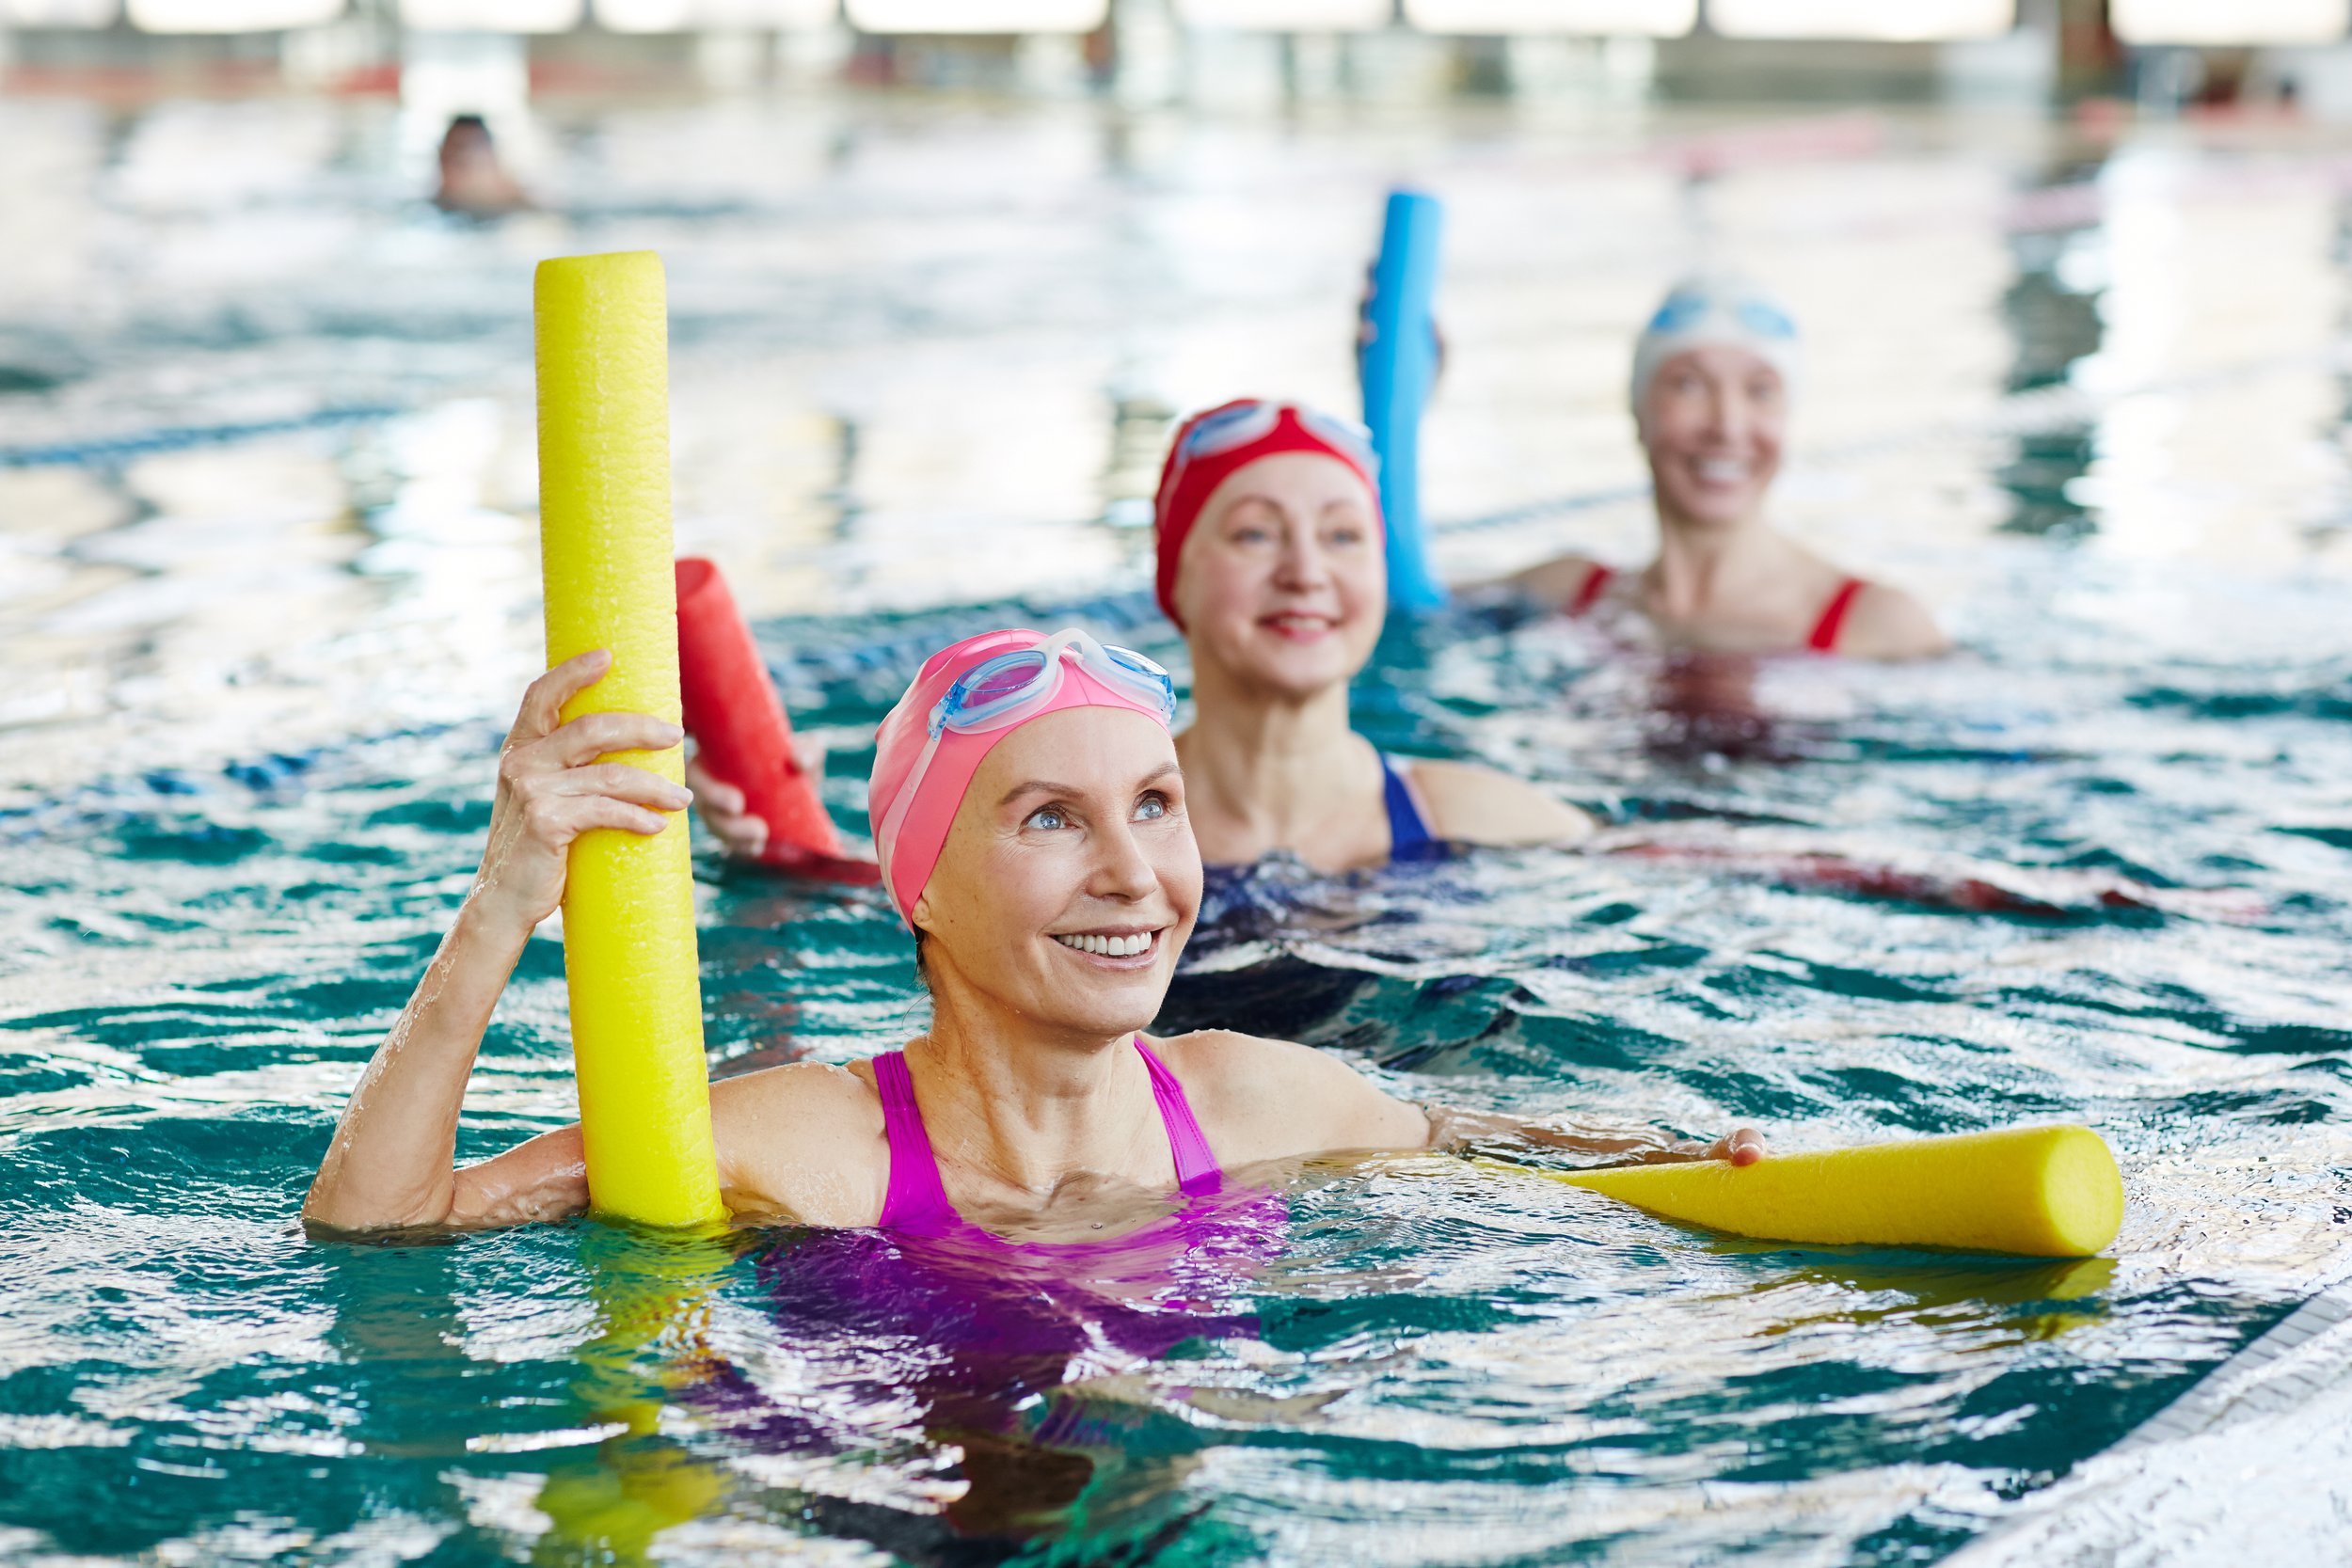 Water Exercise is Great for Joints and the Body